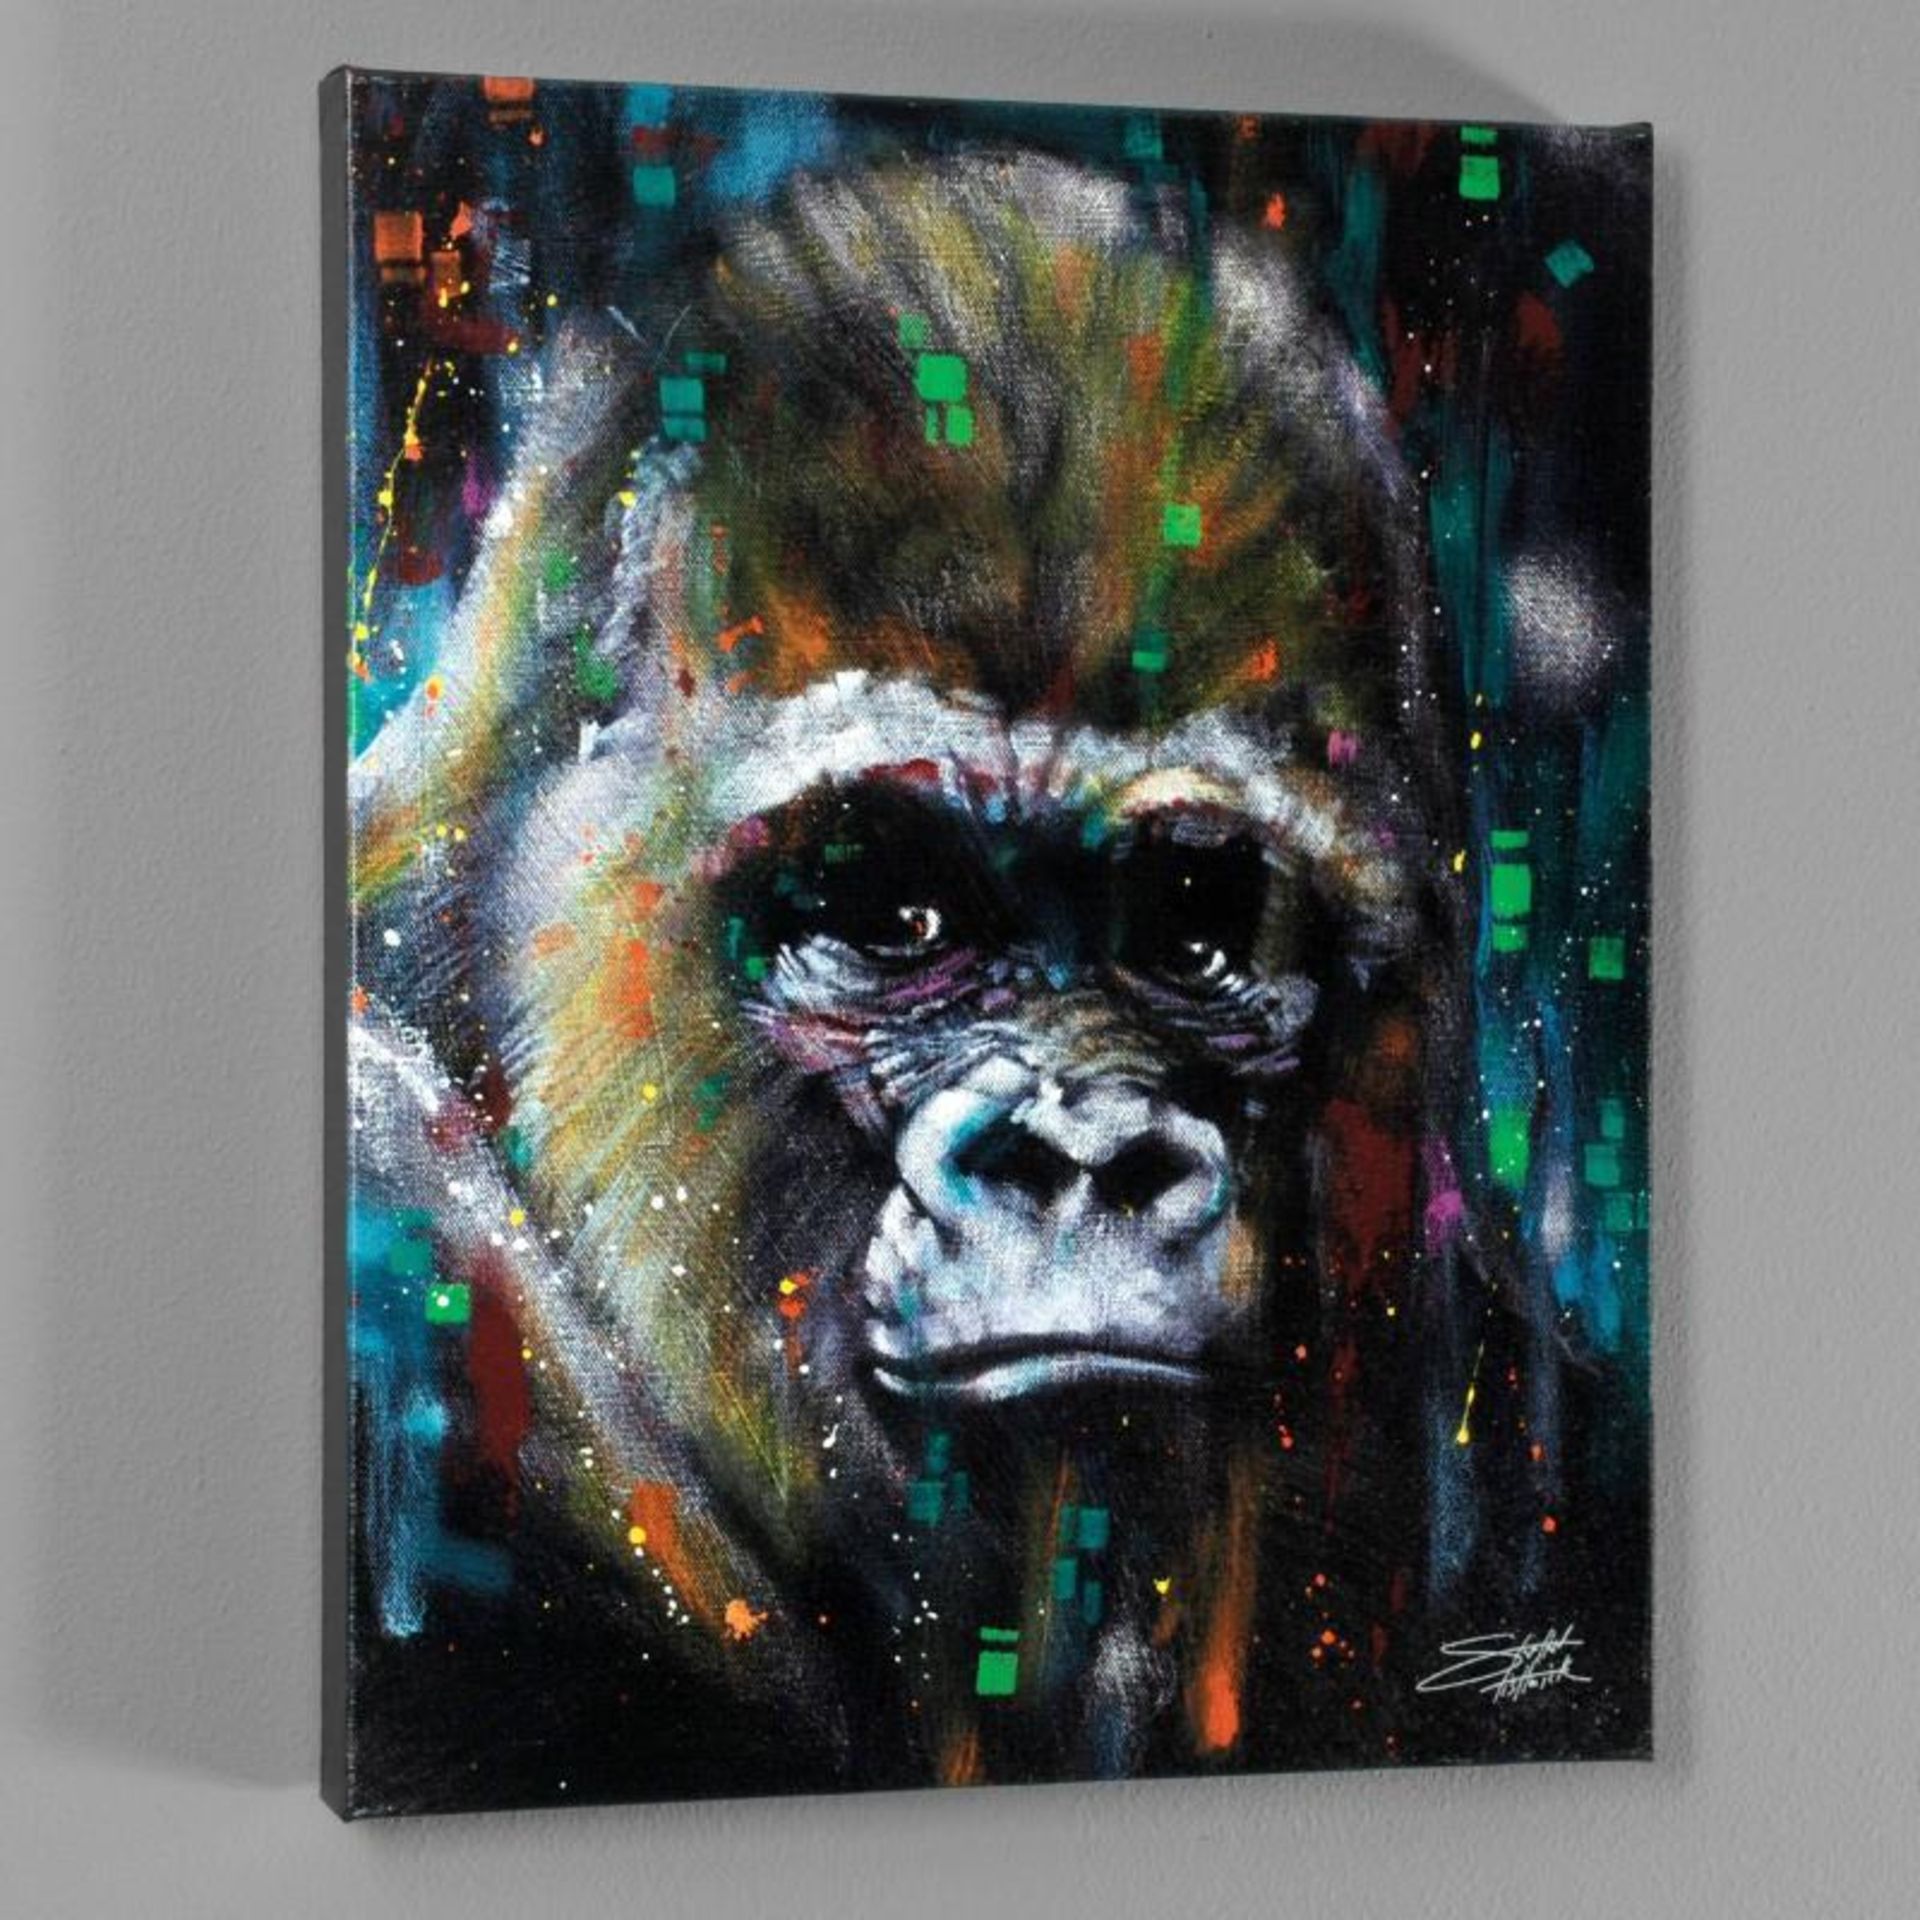 "Albert" Limited Edition Giclee on Canvas by Stephen Fishwick, Numbered and Sign - Image 2 of 2